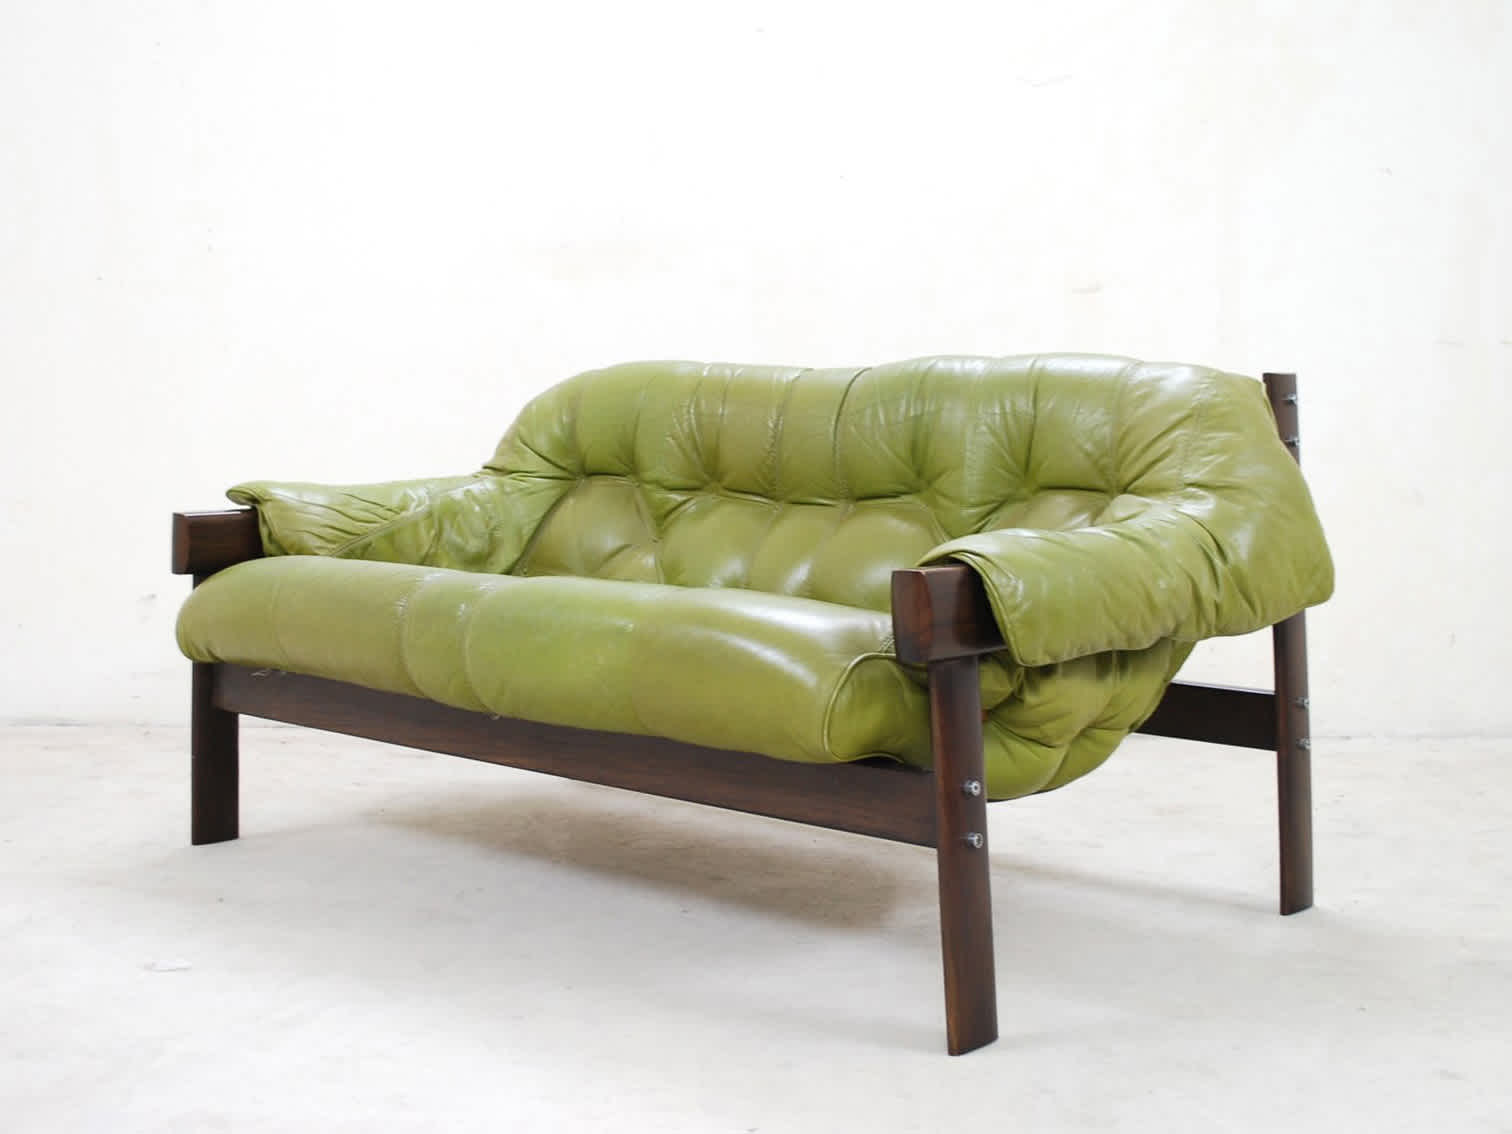 iF Design - iF Magazine: Green Leather Sofa from Percival Lafer, Model MP 041 (1961) © Pamono.